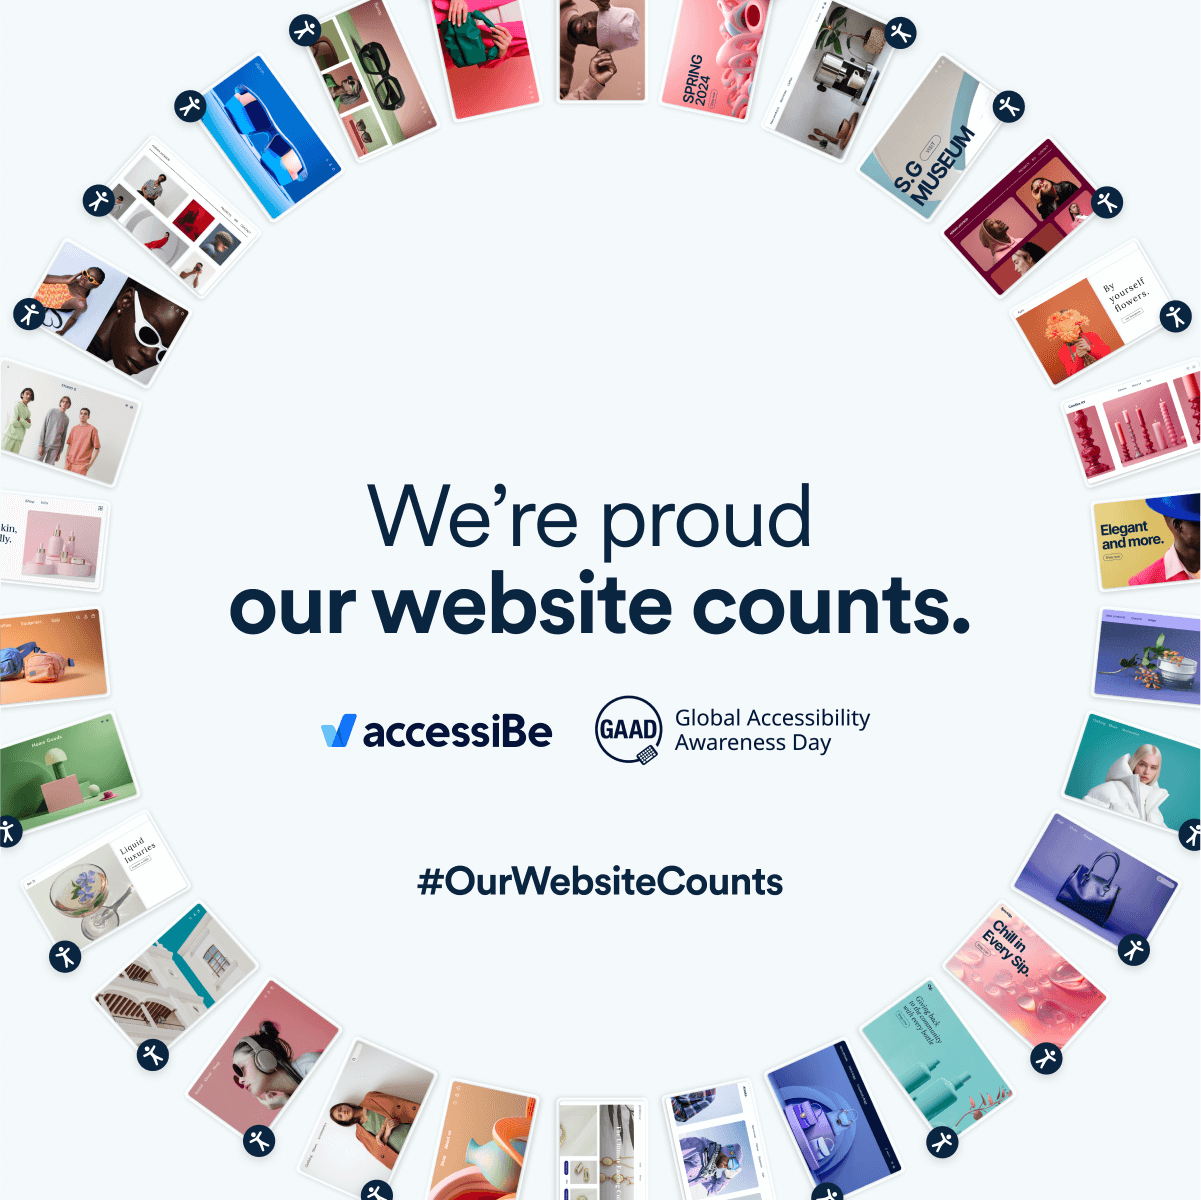 Circle of website screenshots with accessibility features encircling text 'We’re proud our website counts' with the accessiBe and GAAD logos and #OurWebsiteCounts